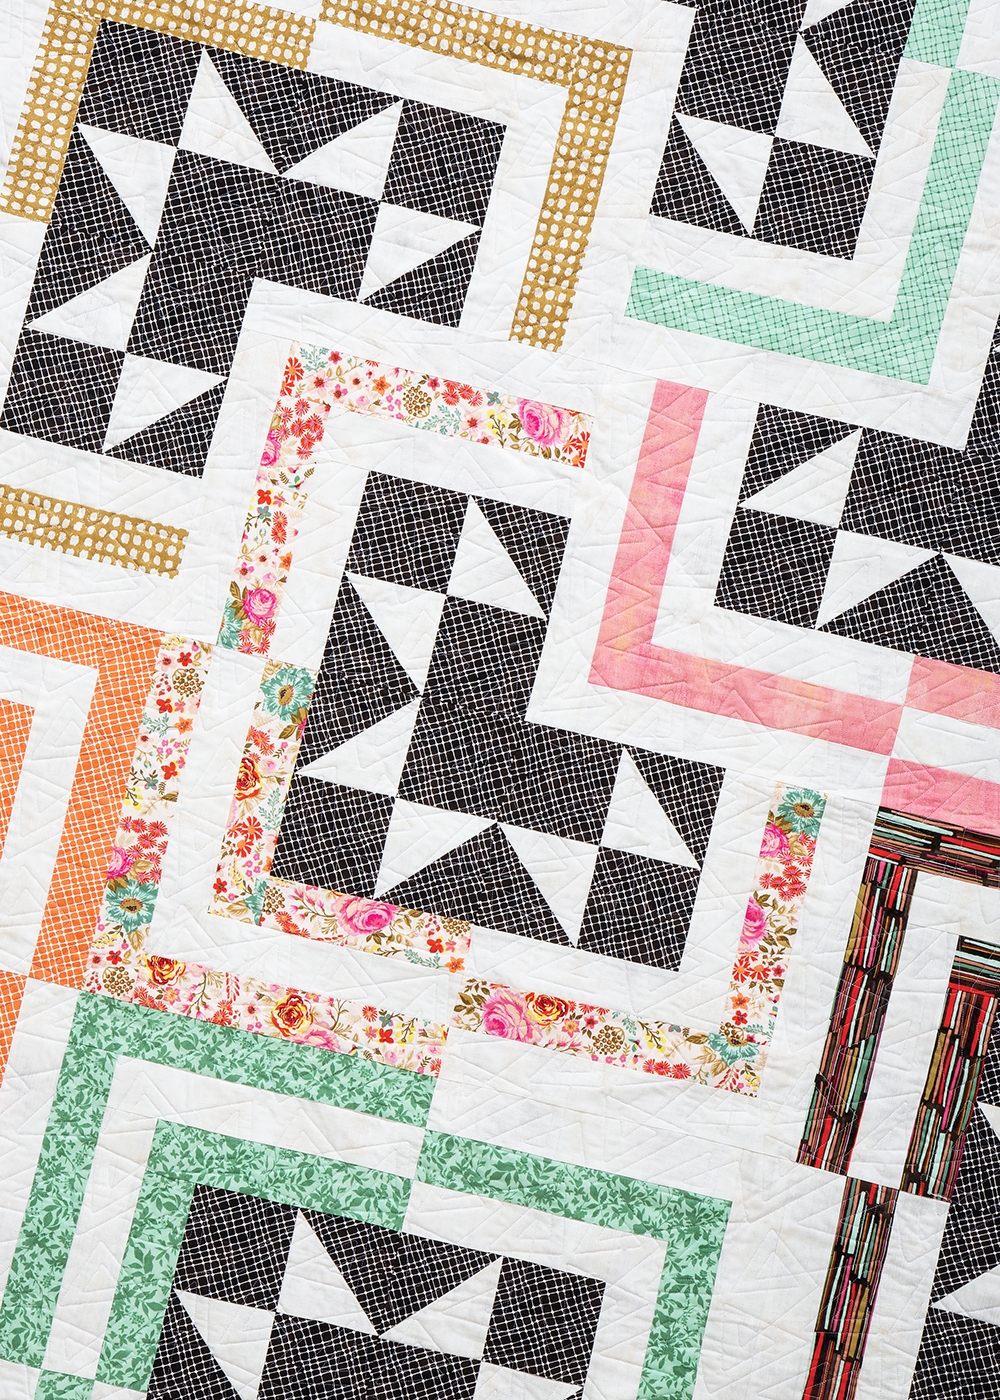 FREE Smart Cookie jelly roll quilt pattern by Vanessa Goertzen of Lella Boutique. Pattern originally found in her book: Jelly Filled - 18 Quilts from 2-1/2" Strips. Fabric is Meraki by BasicGrey for Moda Fabrics.